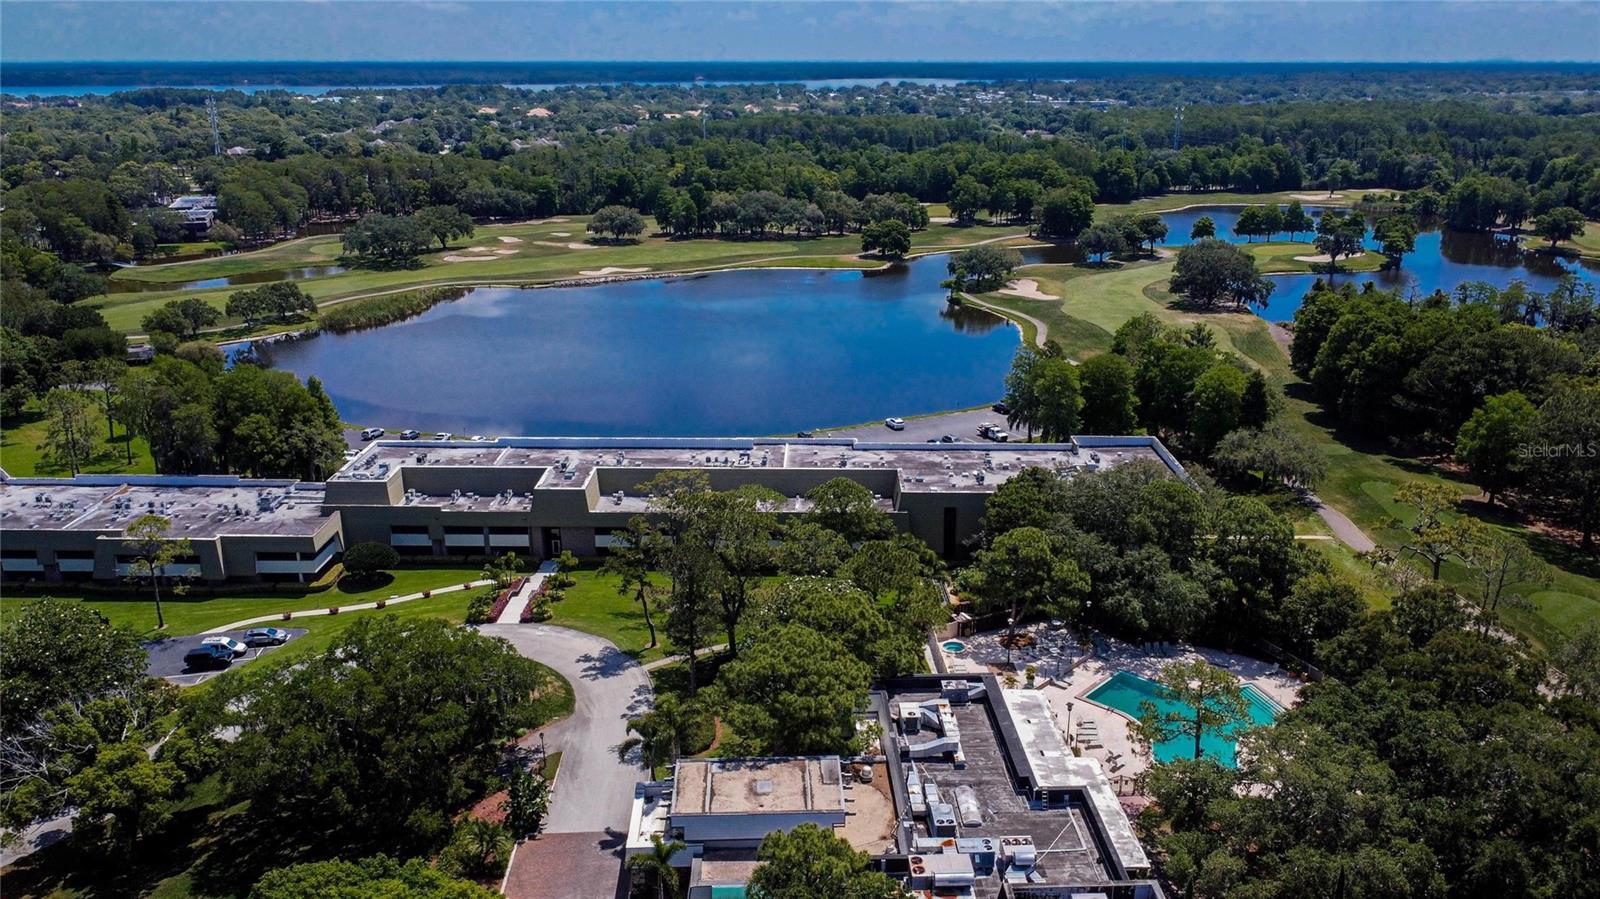 Overlooking Canterbury Building with Island Pool in foreground next to Lake Innisbrook.